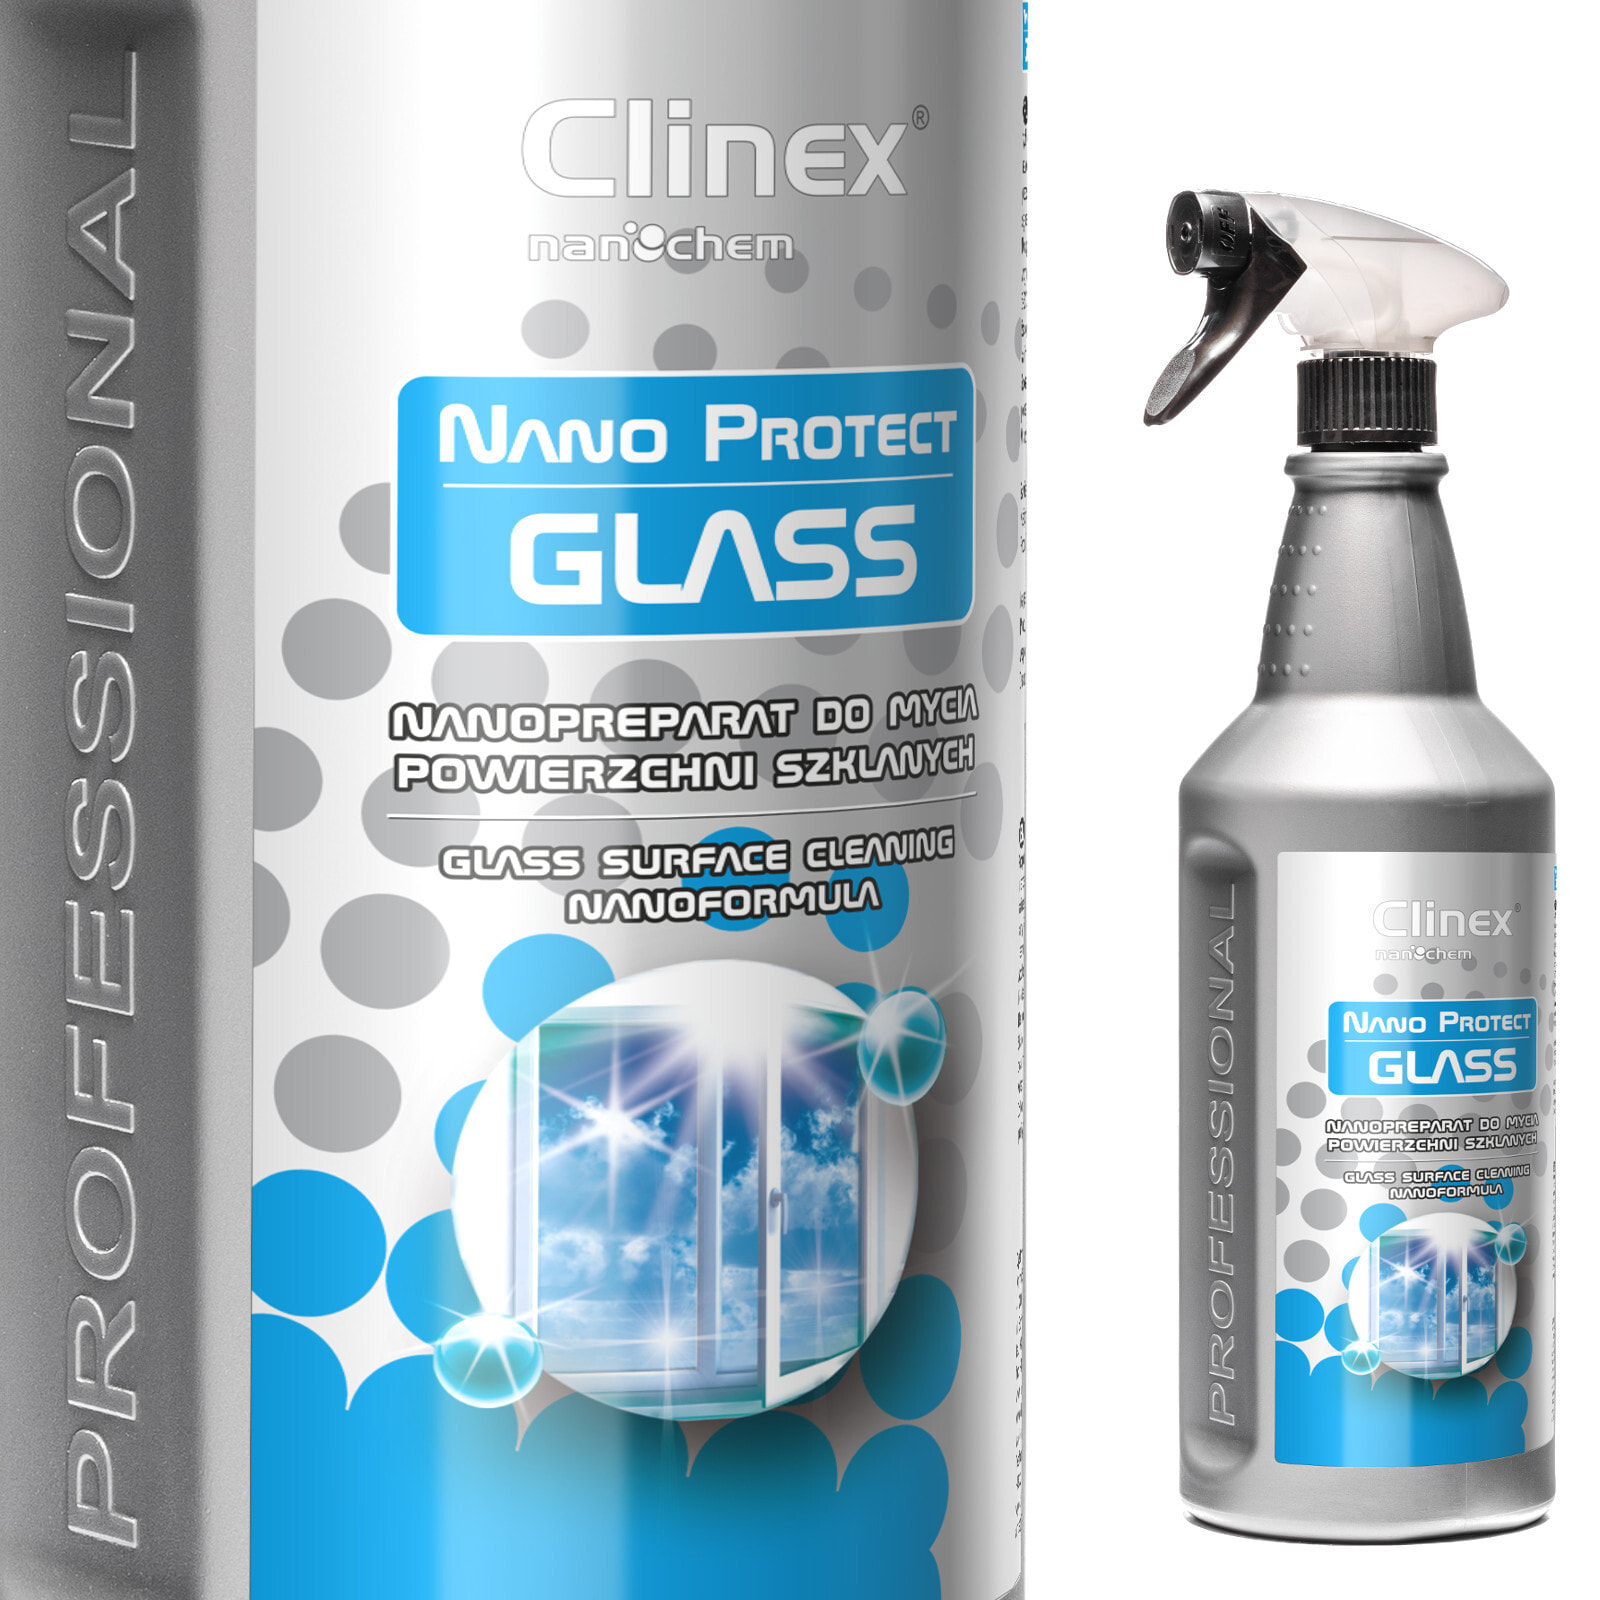 Nano-preparation for cleaning mirror glass panes without streaks, crystal shine CLINEX Nano Protect Glass 1L